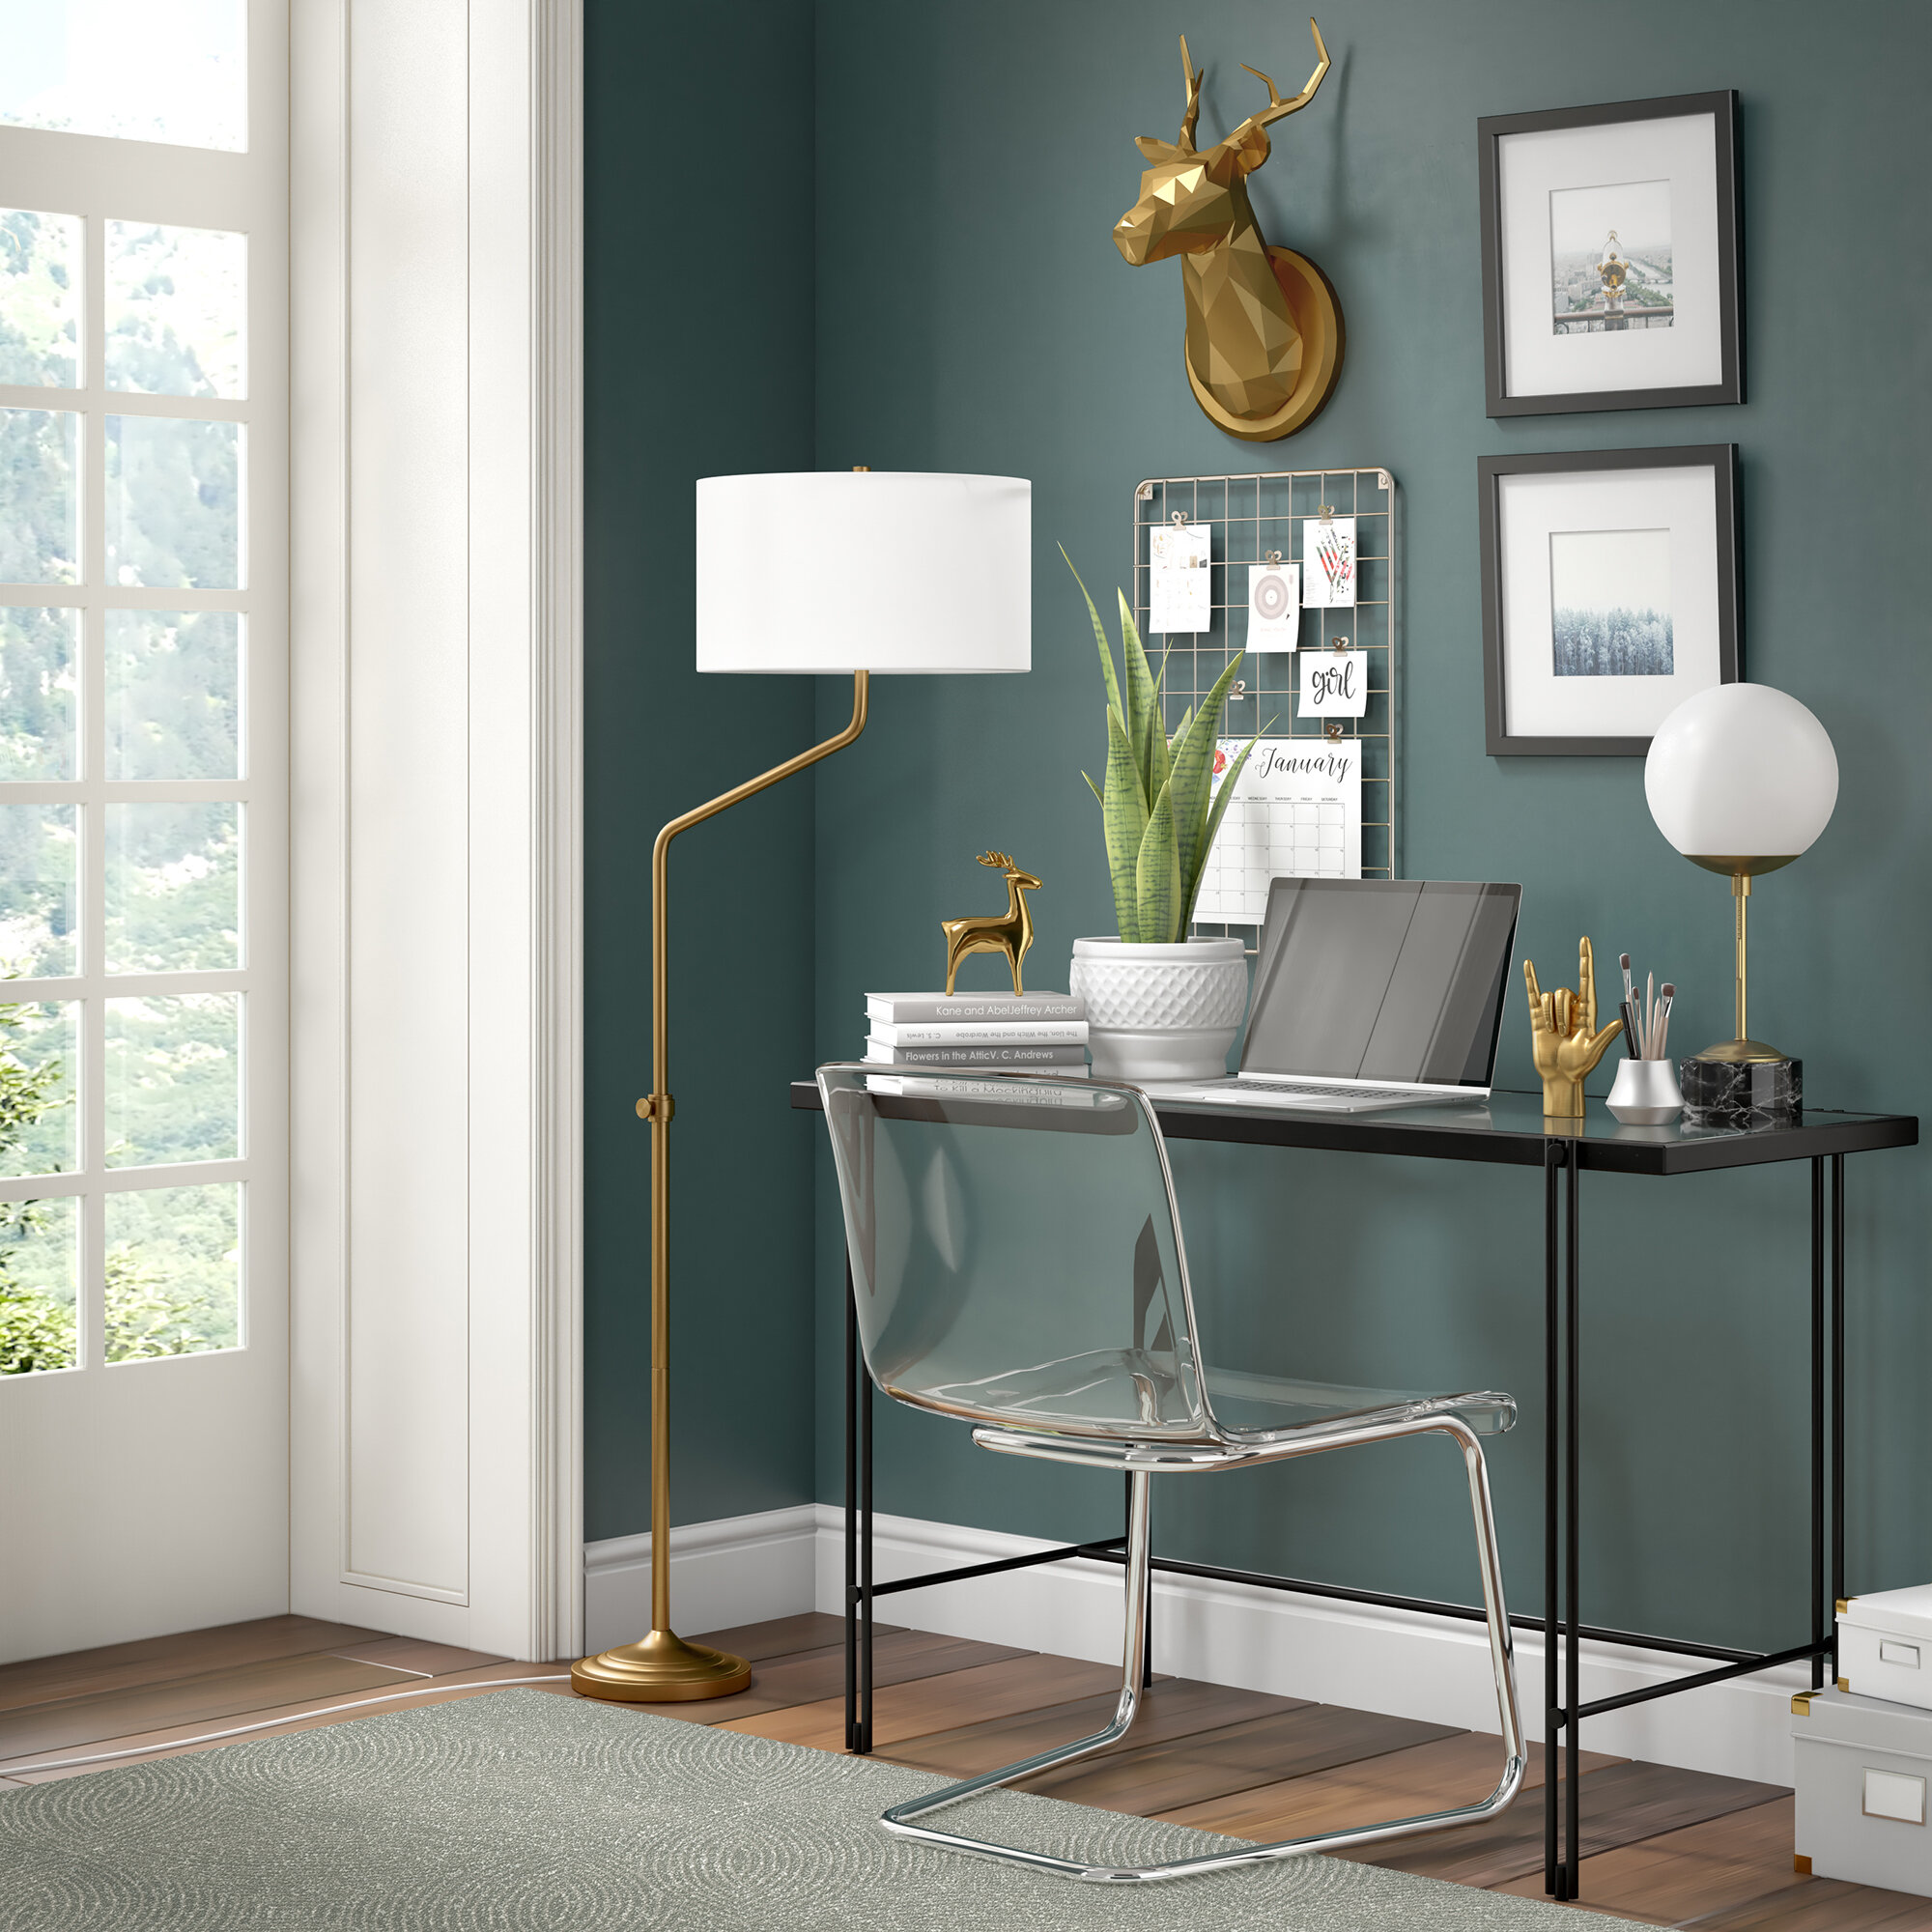 Wayfair 65-69 Inches Gold Floor Lamps You'll Love in 2023